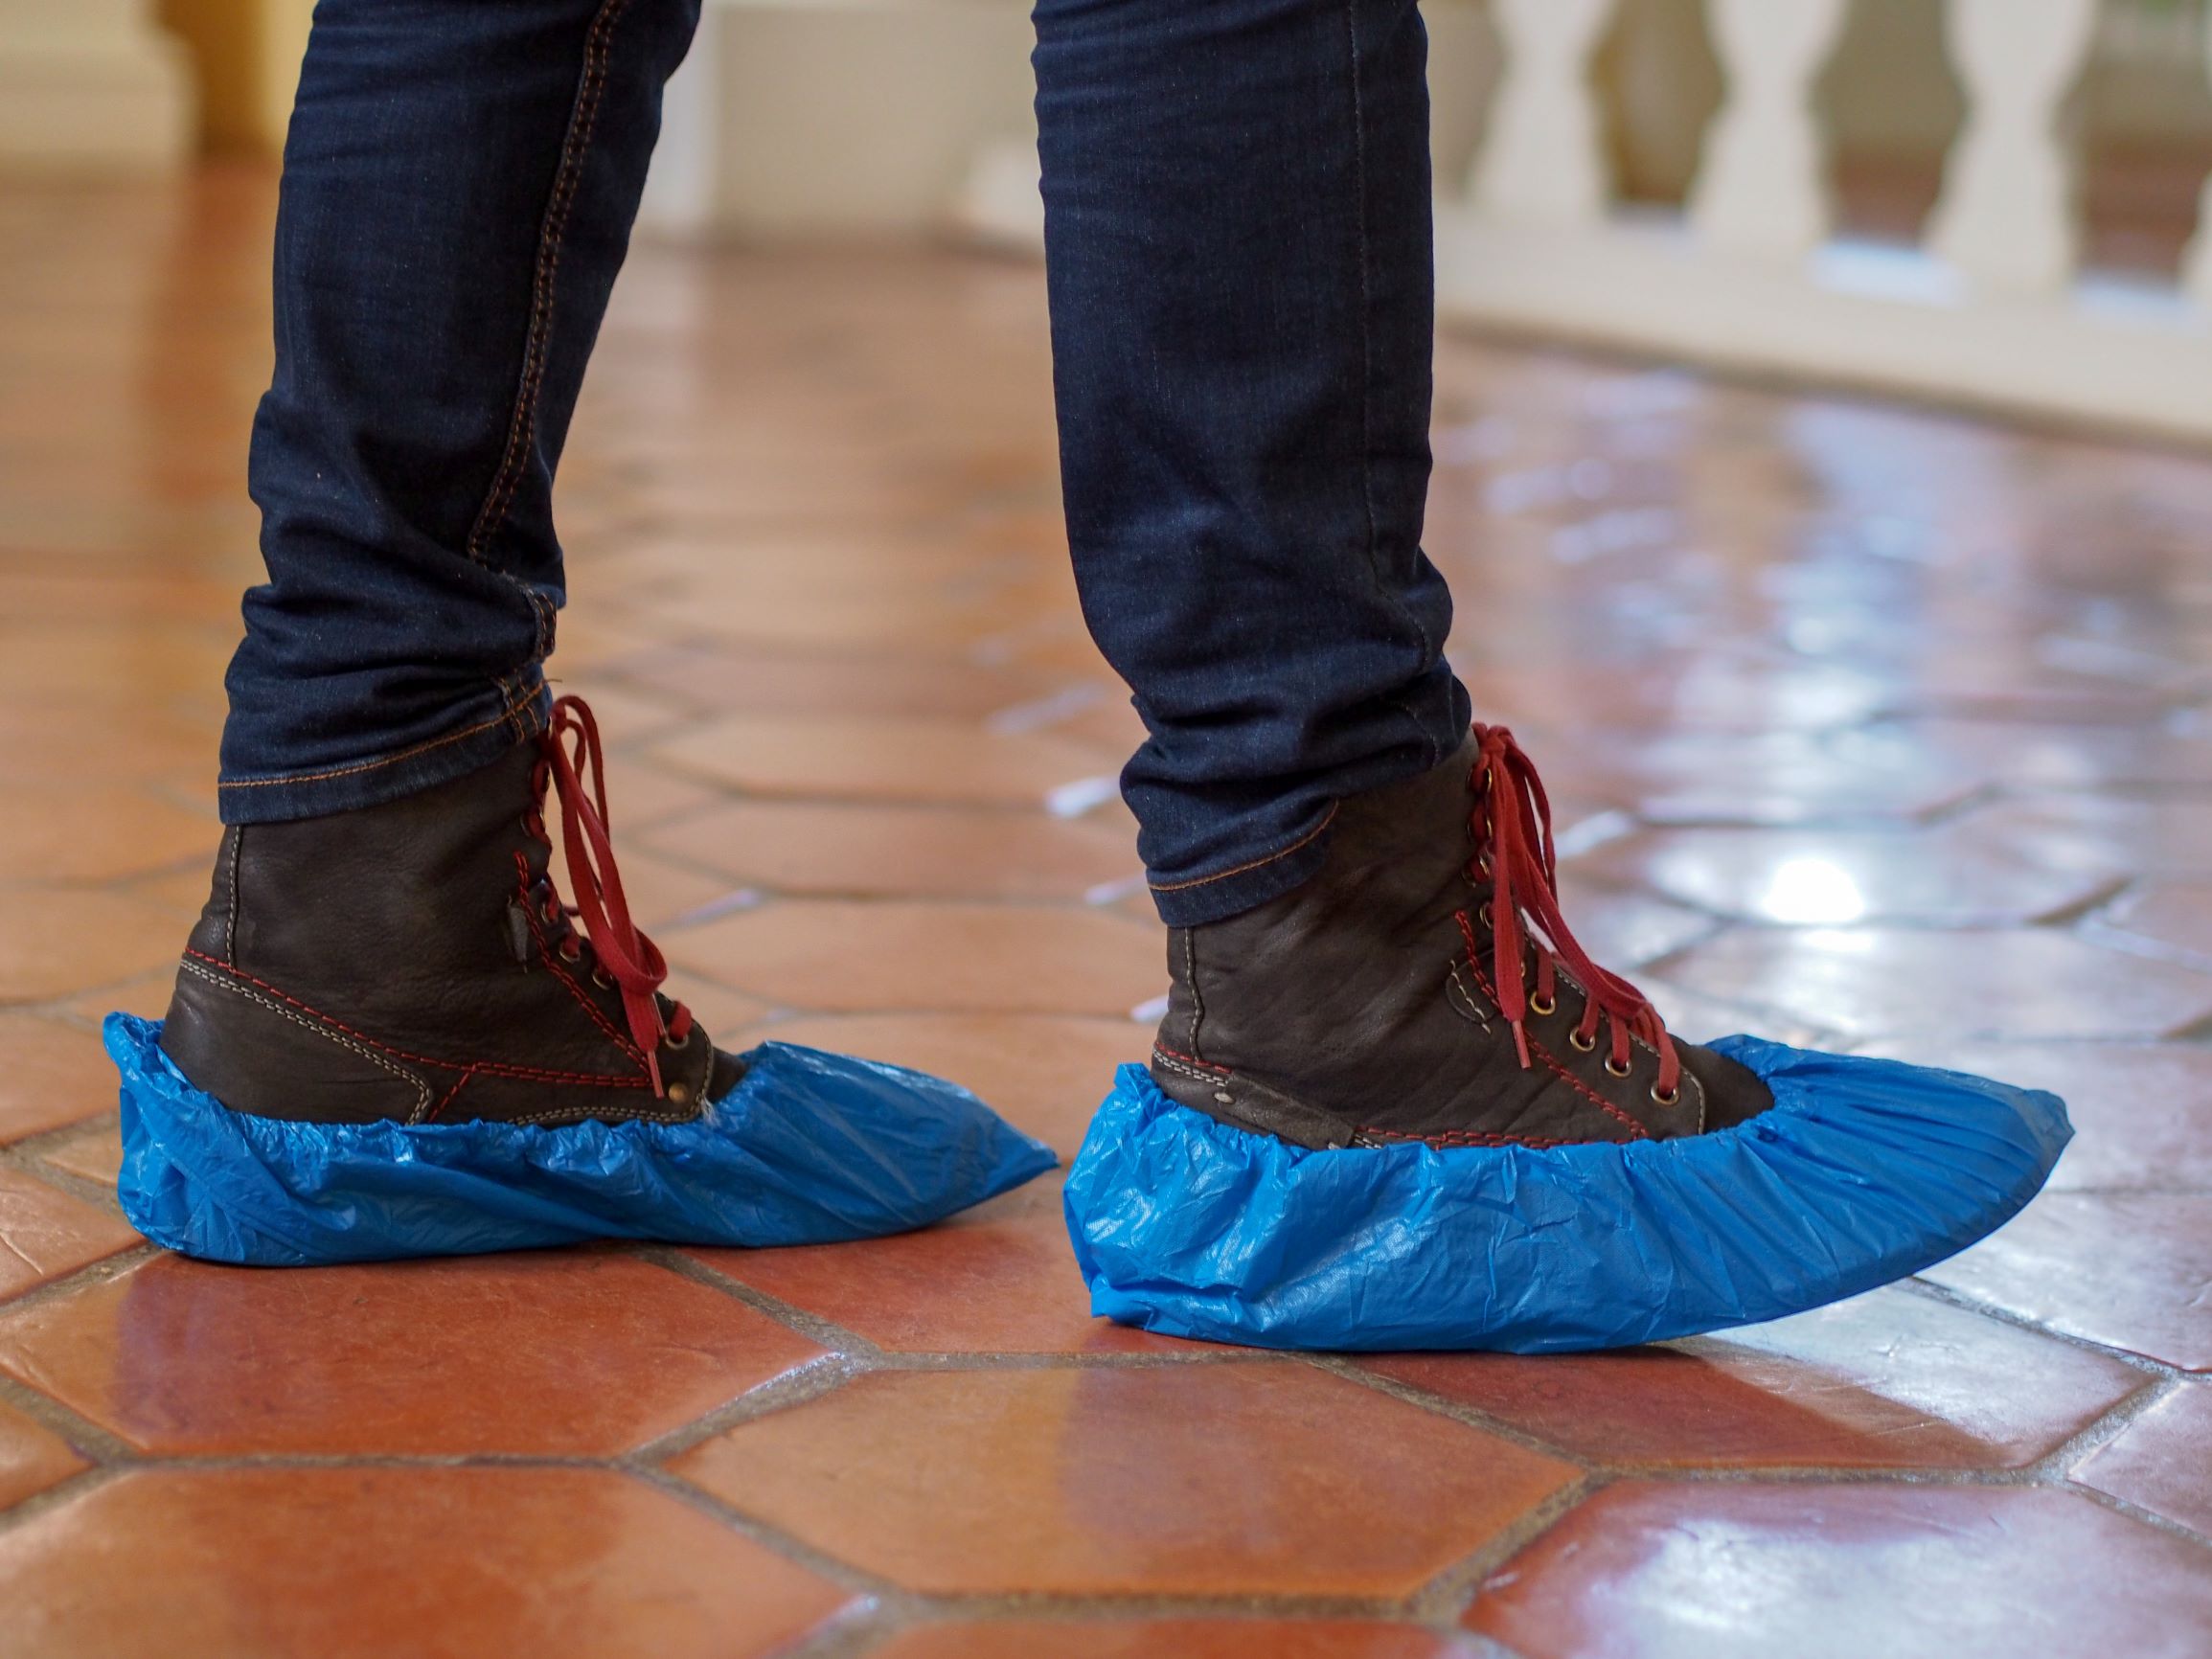 A person wearing fitted blue shoe covers on tile floor at home.